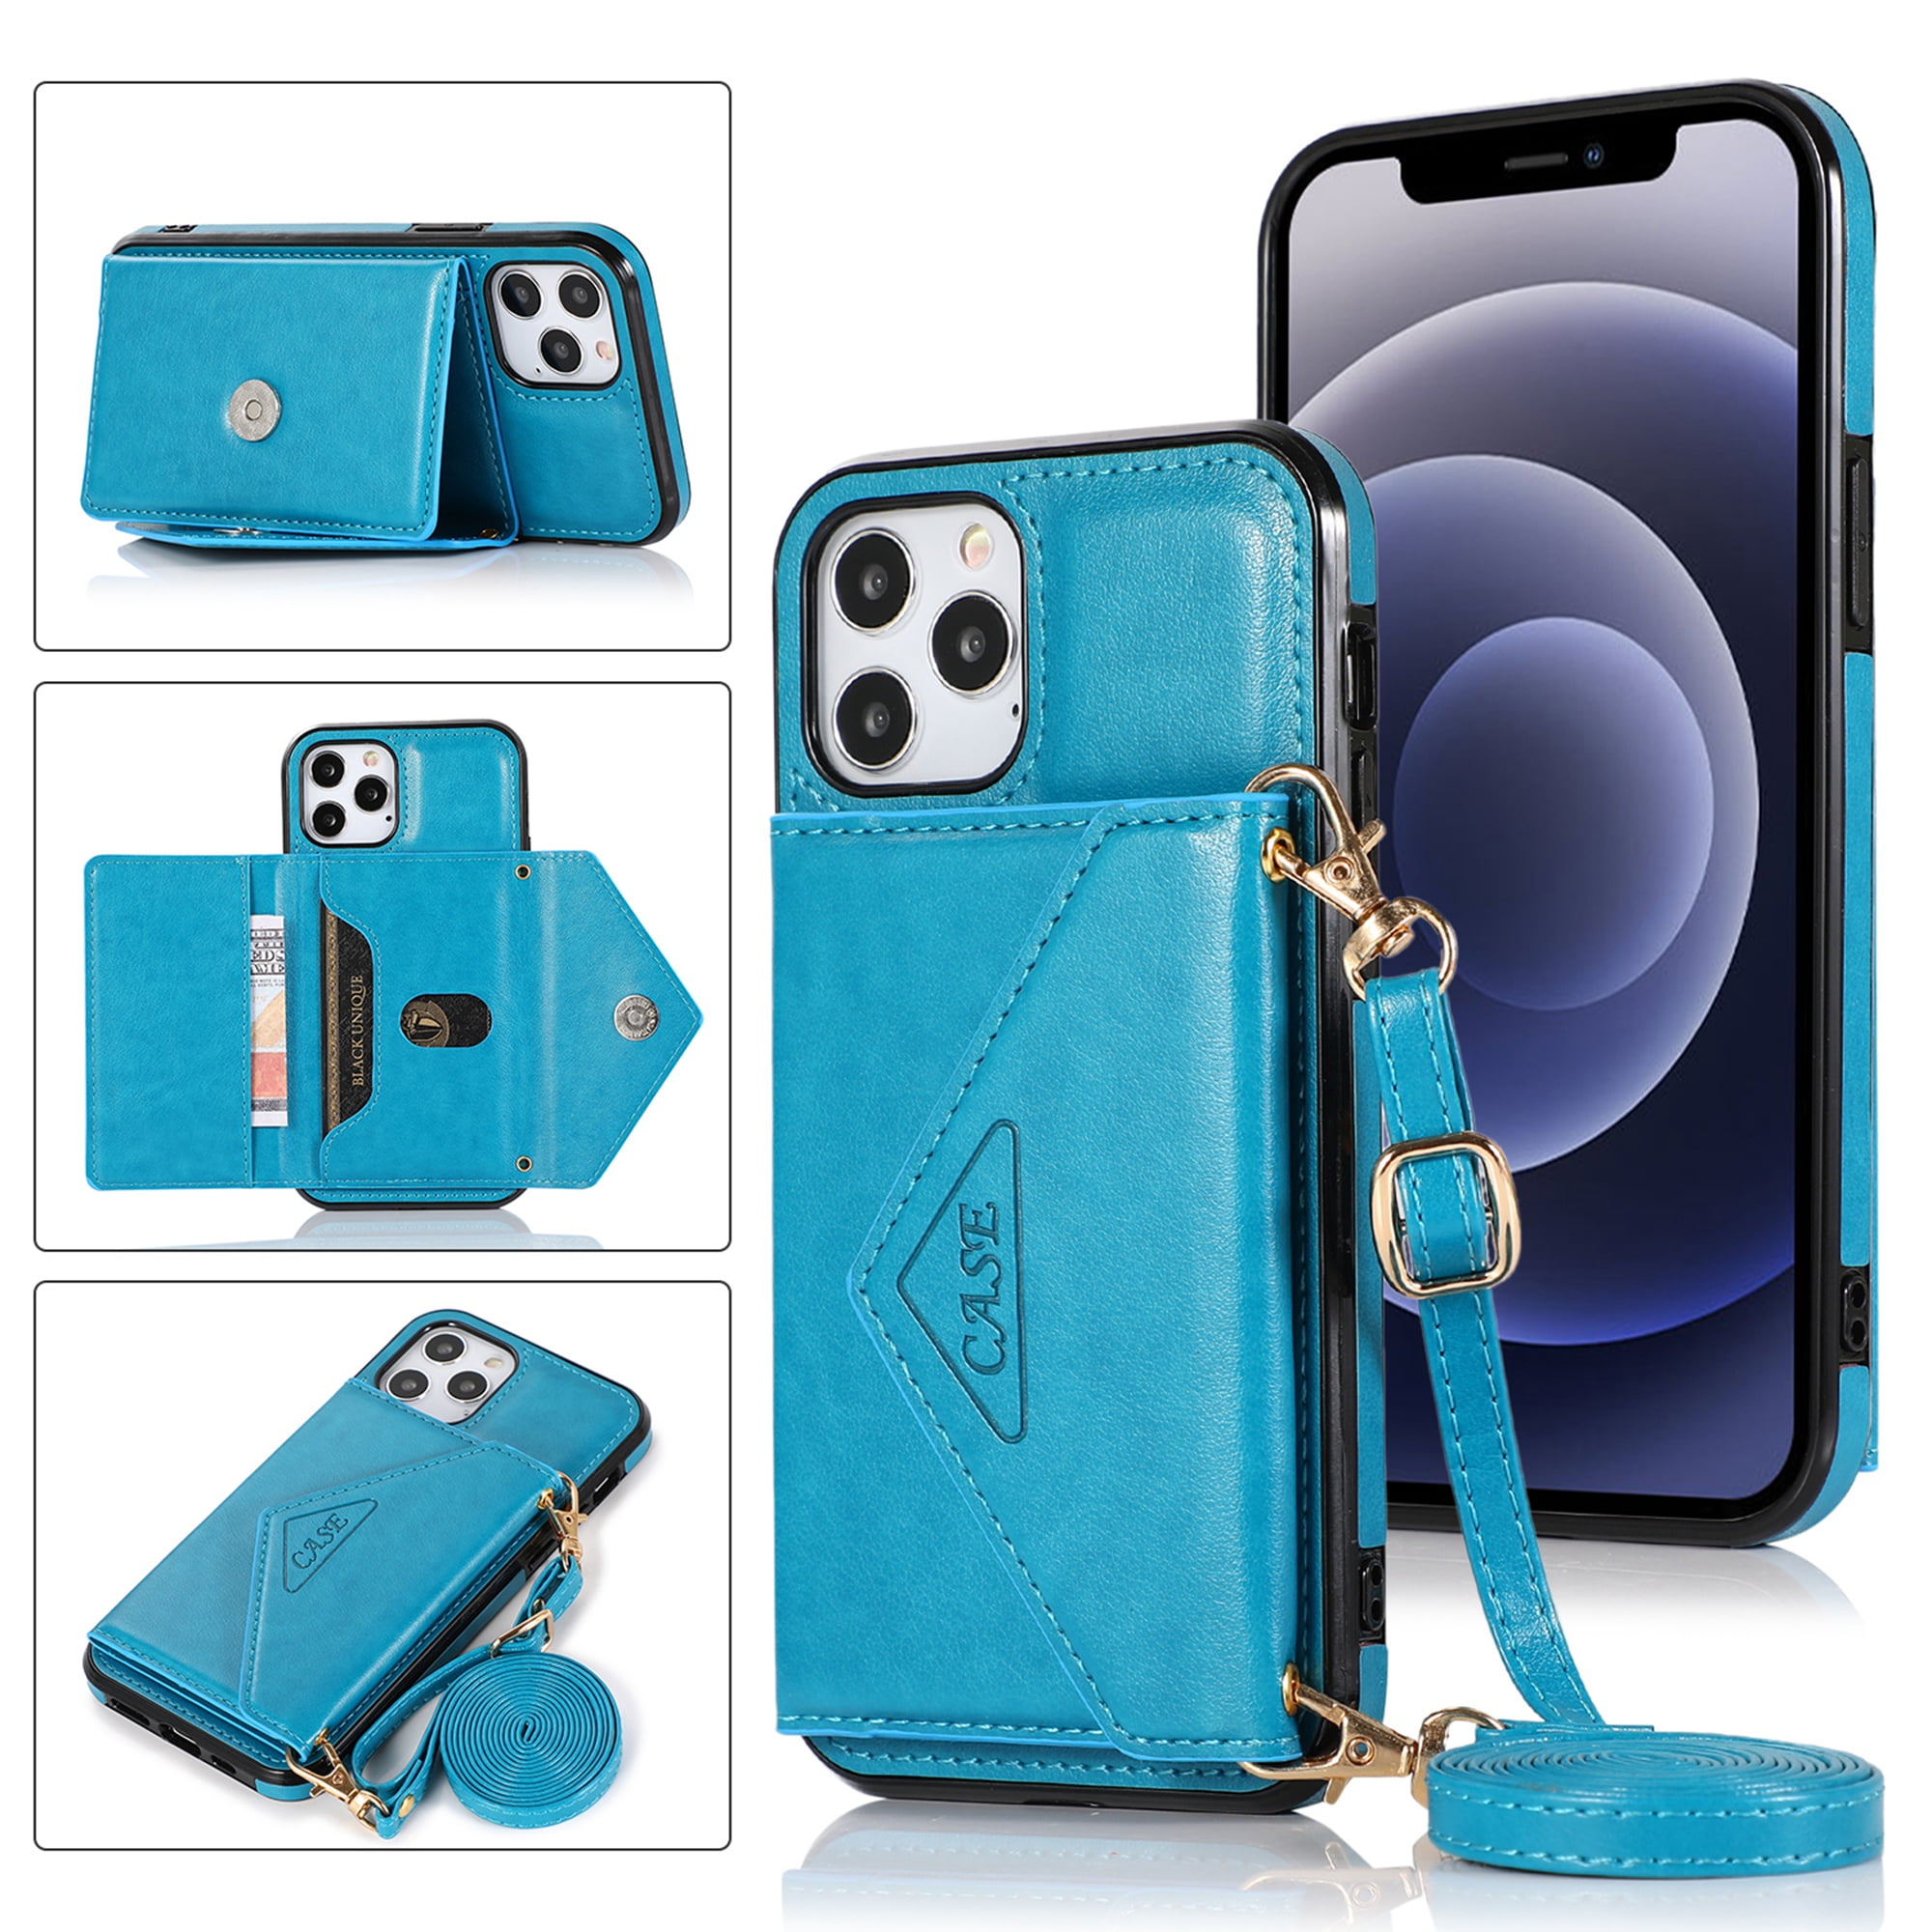 iPhone 12 Pro Max Case Flip Zipper PU Leather Shock-Absorption Book Wallet Cases with Stand Magnetic Multi Card Slots Folio Silicone Bumper Gel Protective Phone Cover for iPhone 12 Pro Max blue